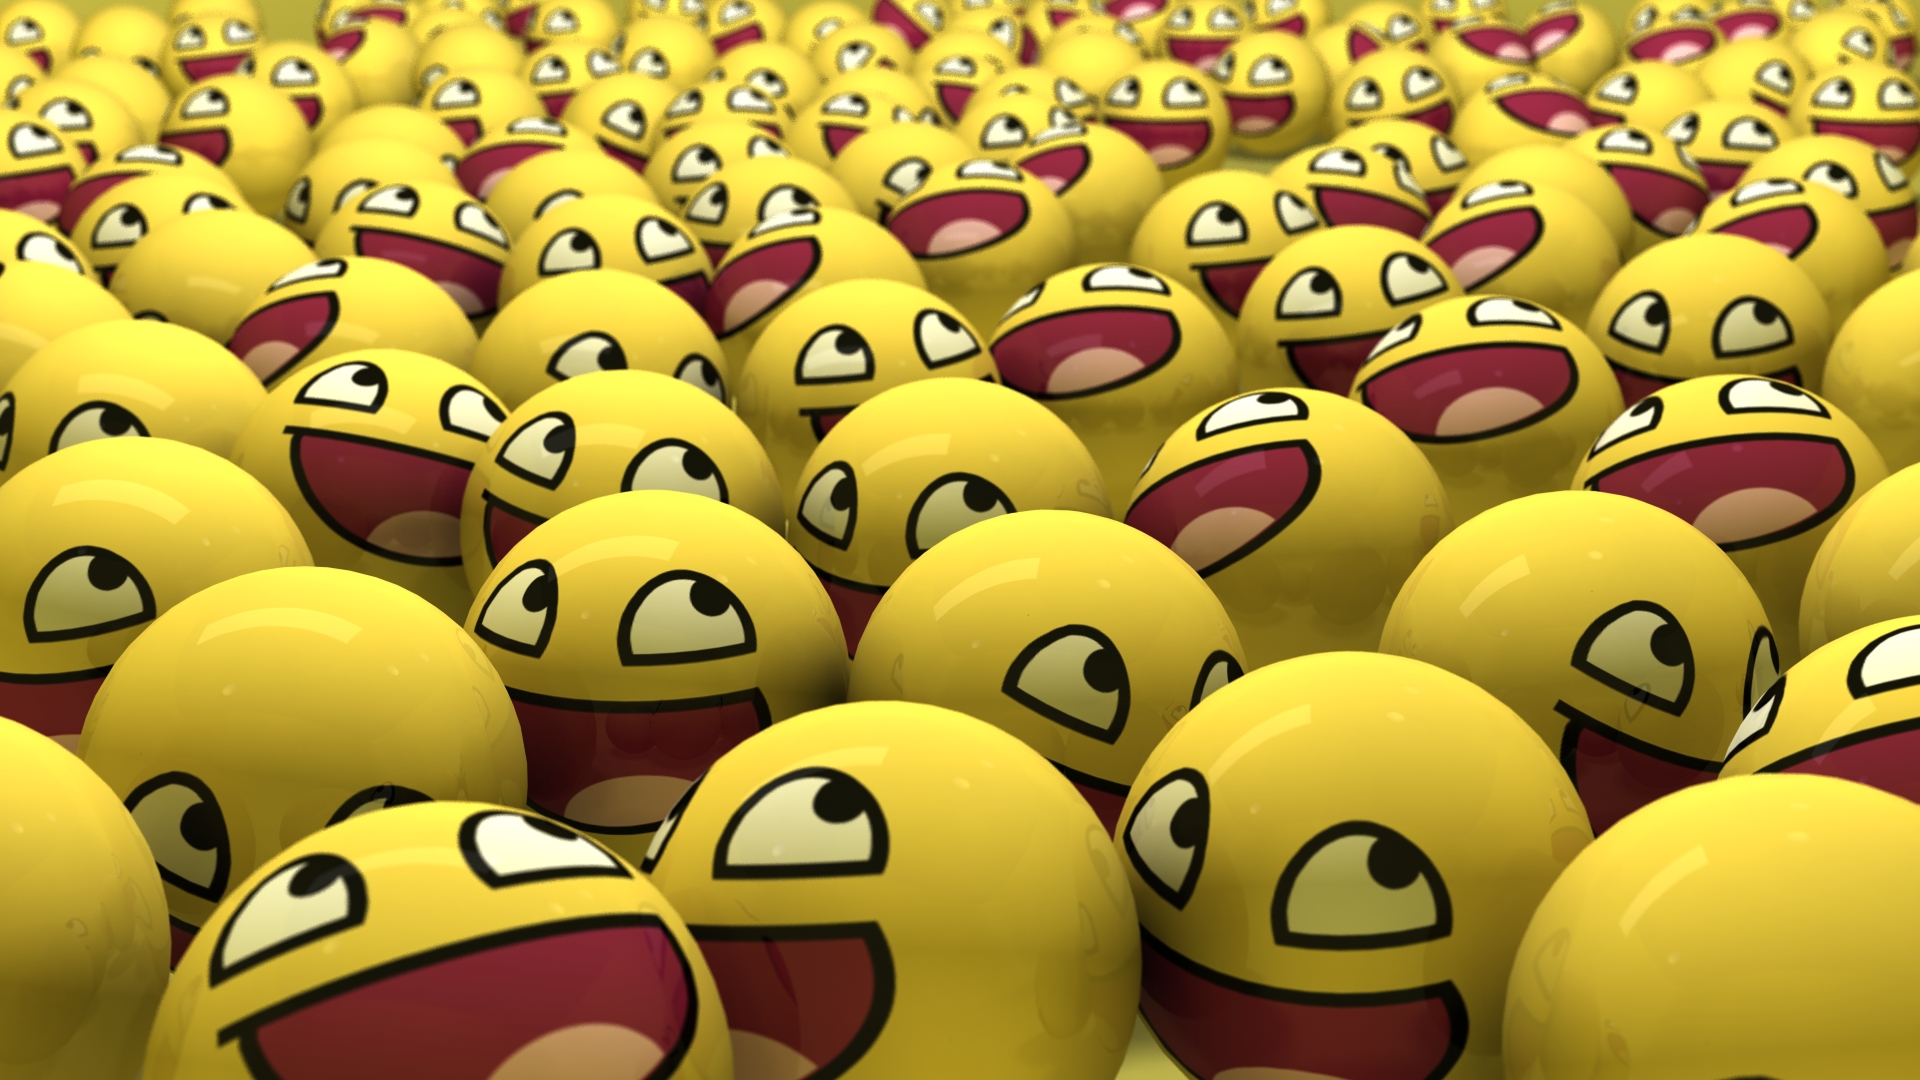 Smiley Faces wallpapers HD free   446787